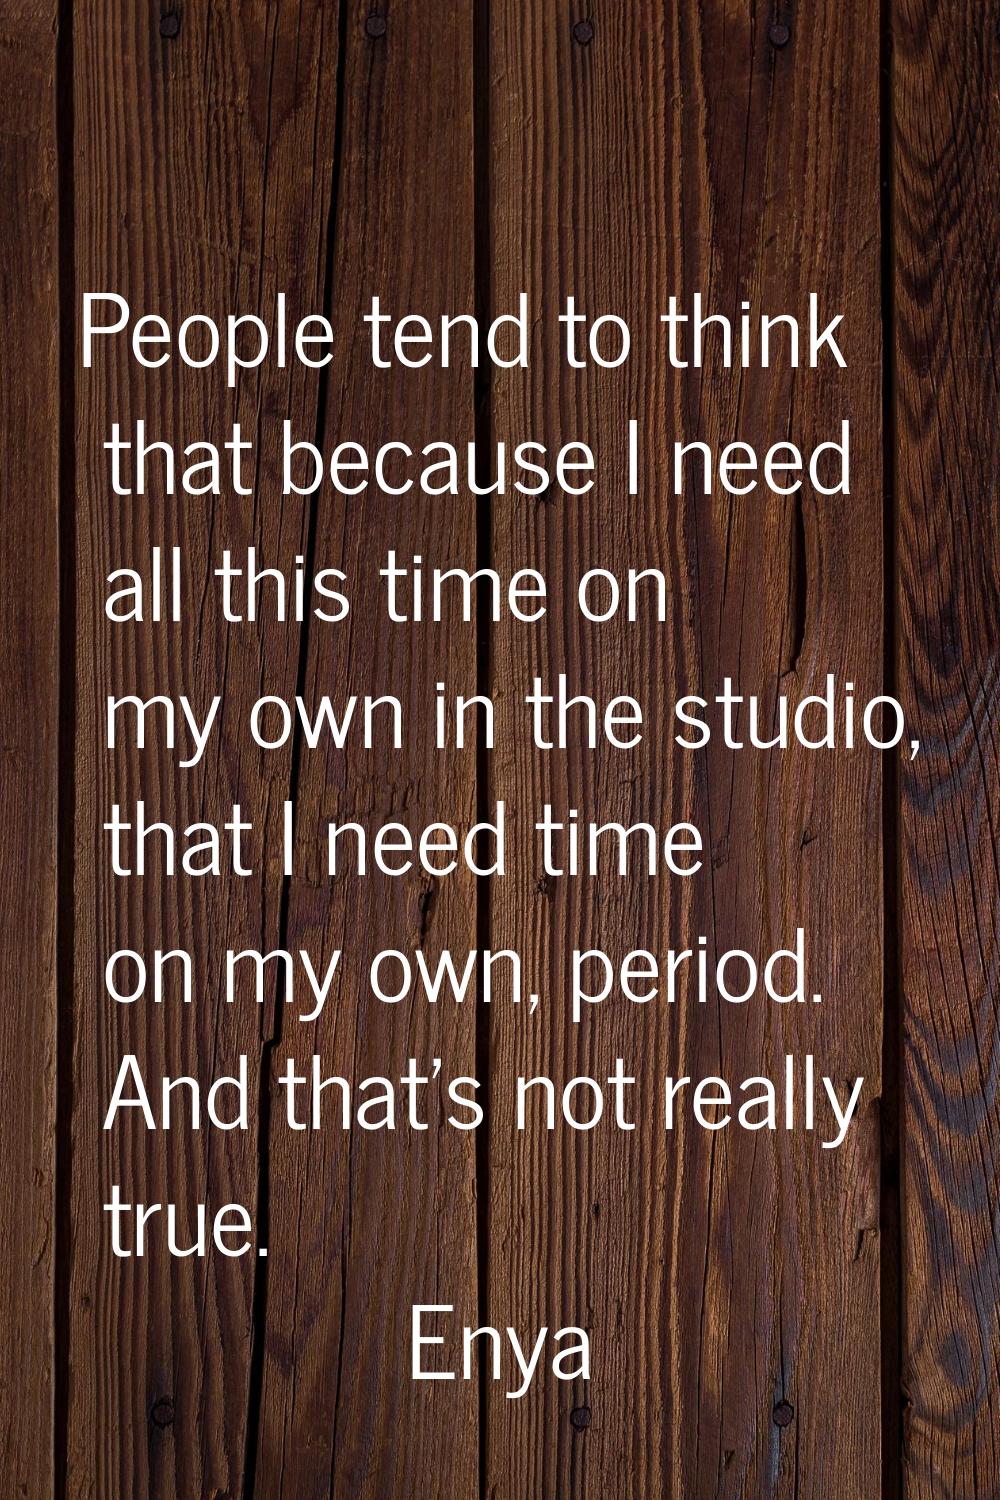 People tend to think that because I need all this time on my own in the studio, that I need time on